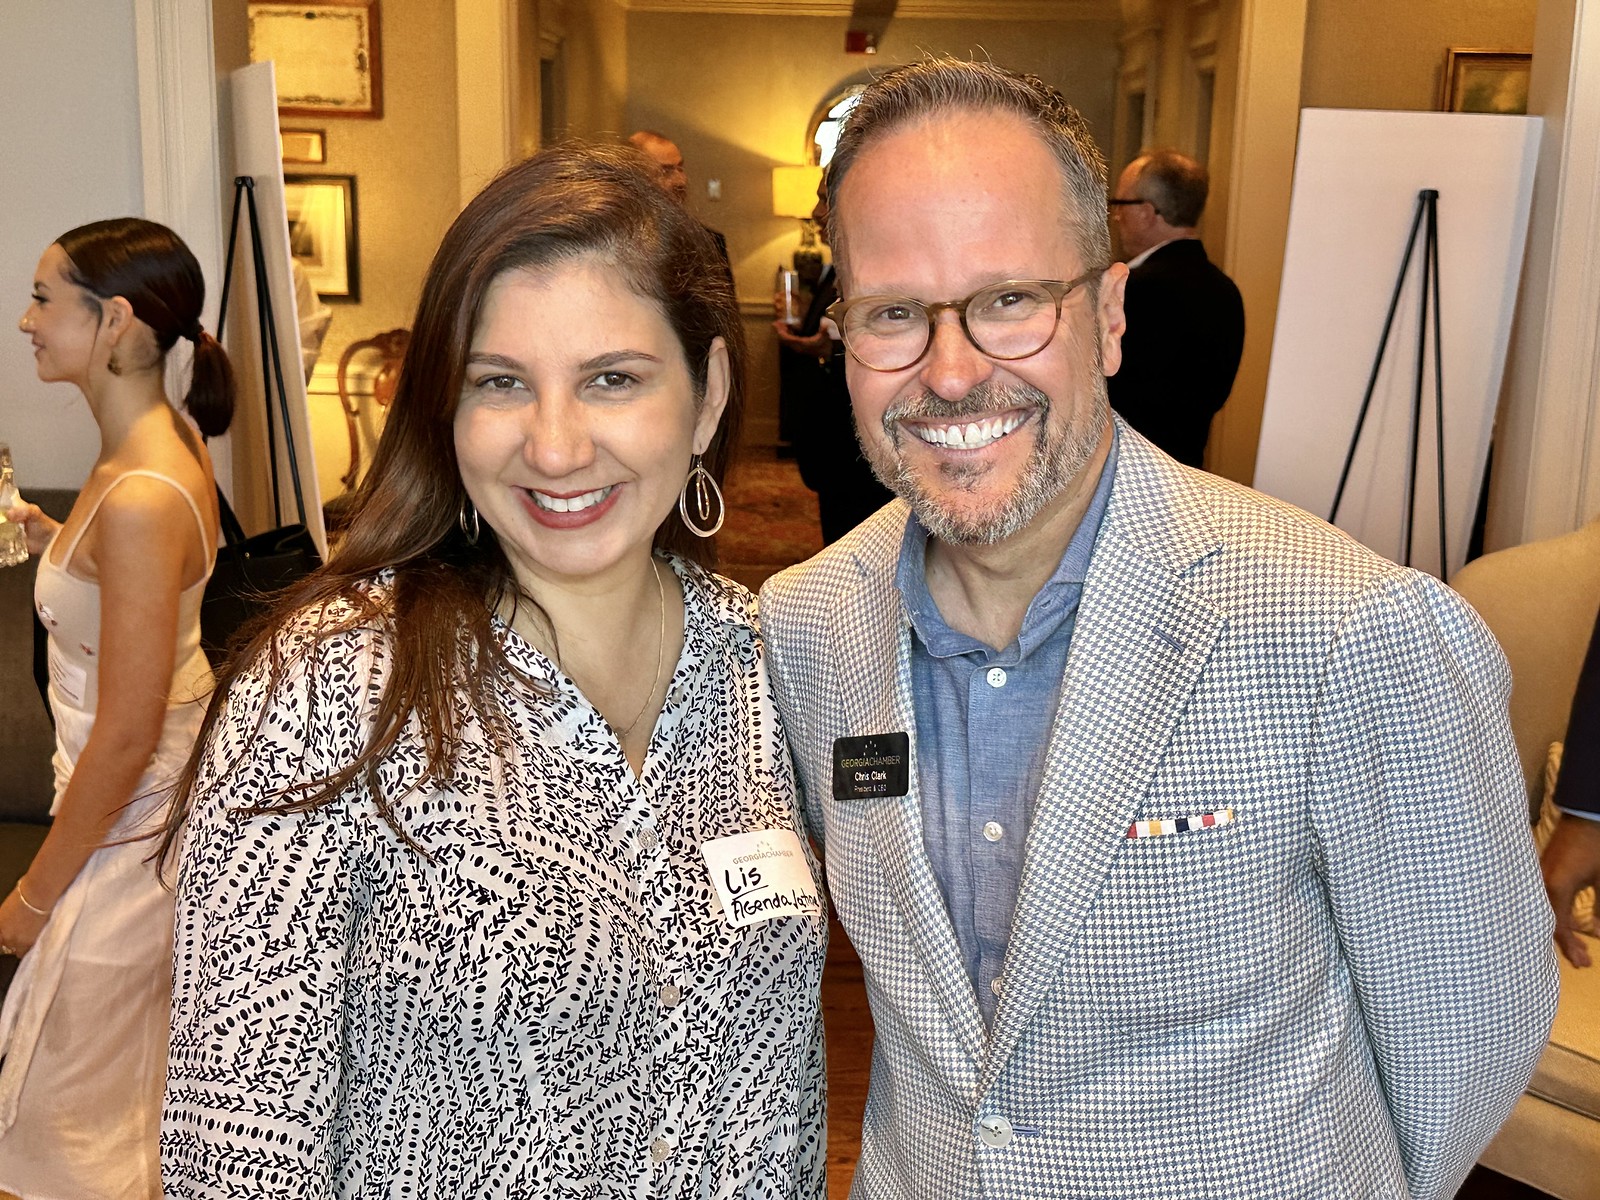 Georgia Chamber Connections at the Chatham Club